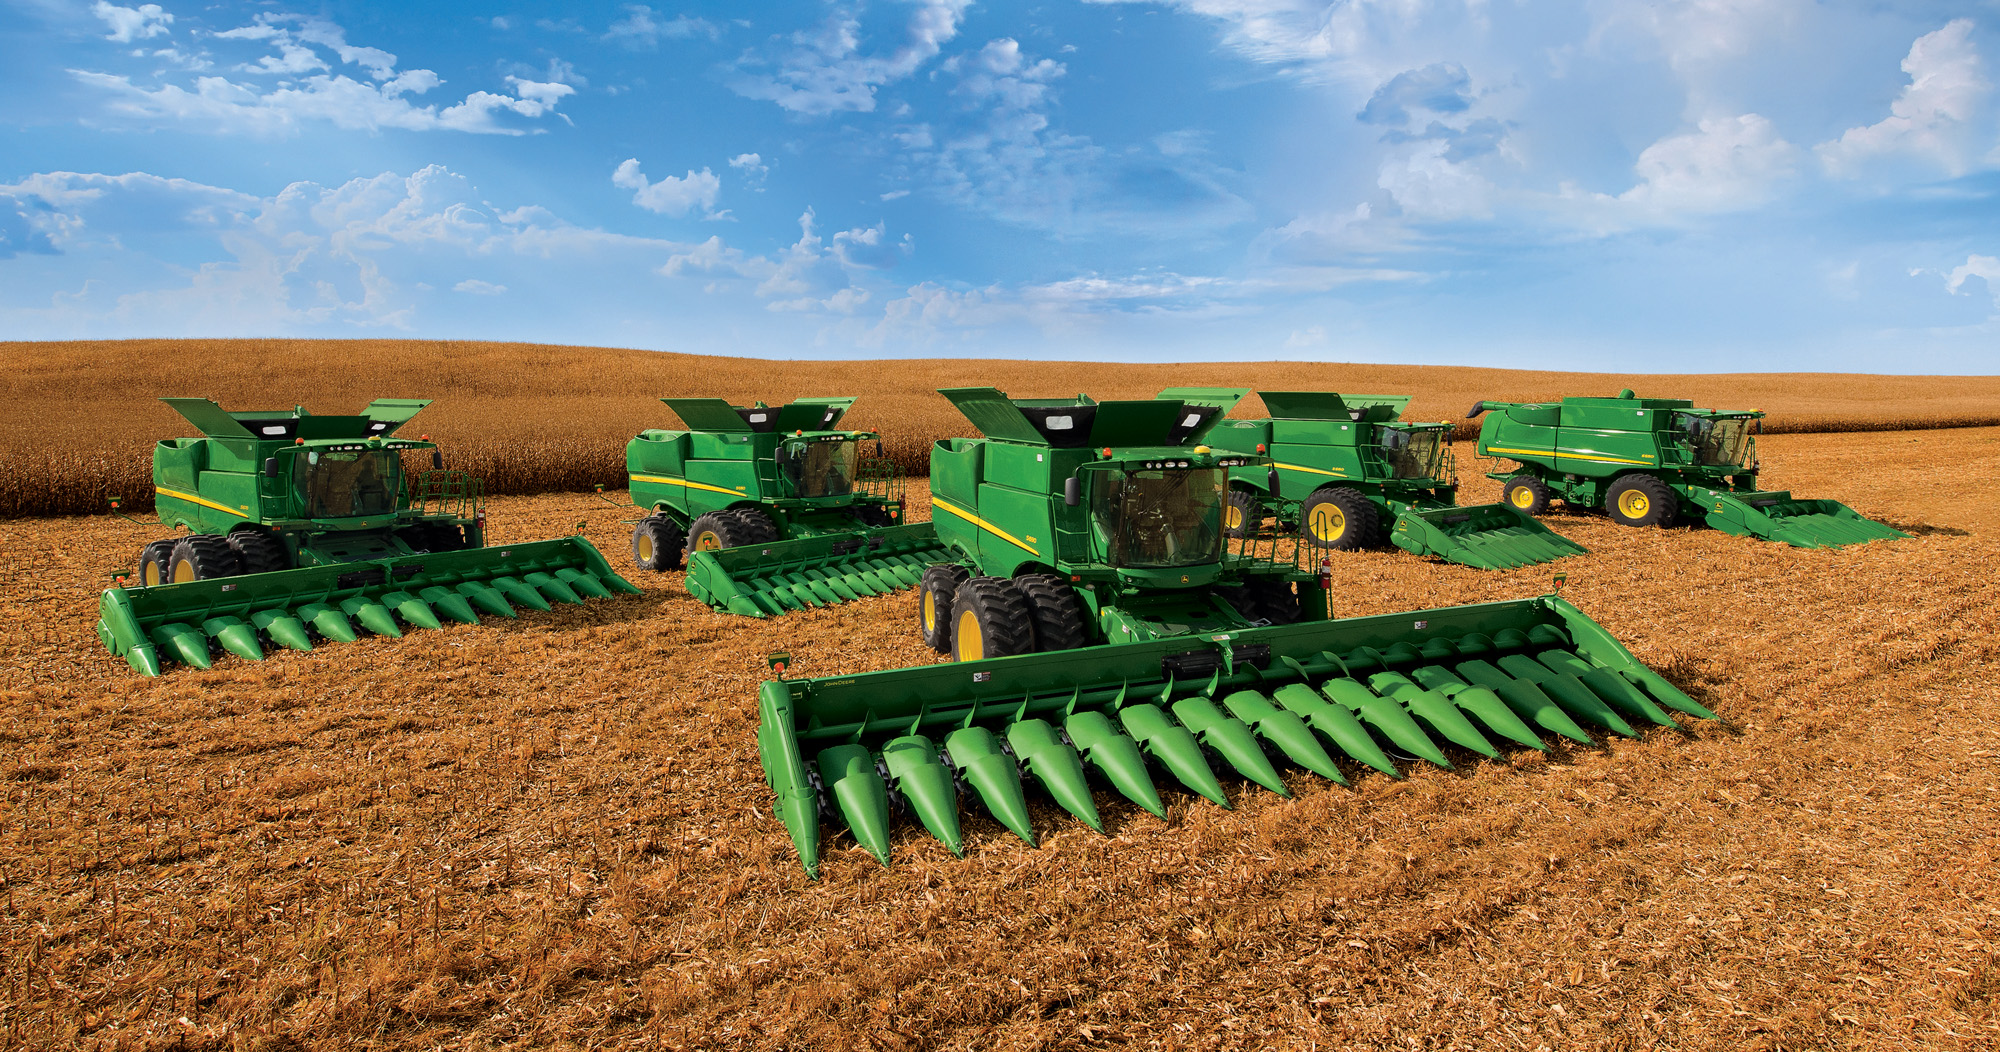 deere-s-new-product-intro-was-the-largest-ever